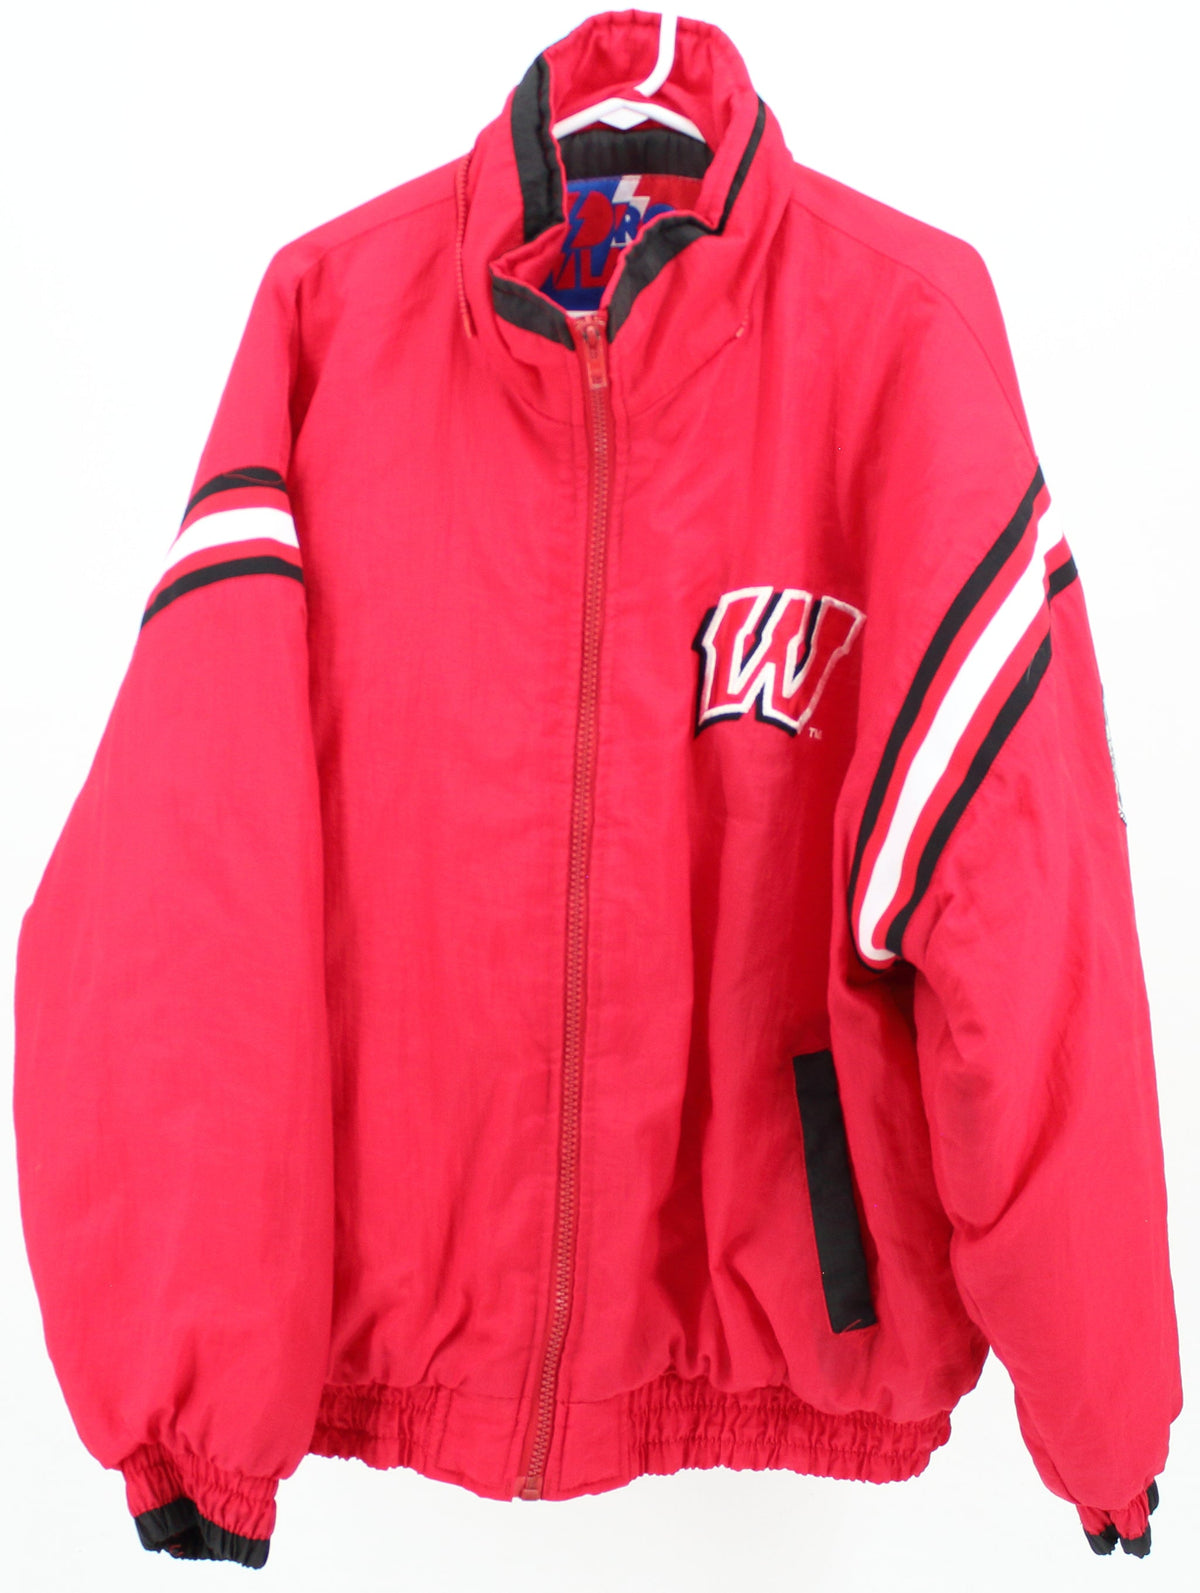 Pro Player by Daniel Young Wisconsin Red Jacket